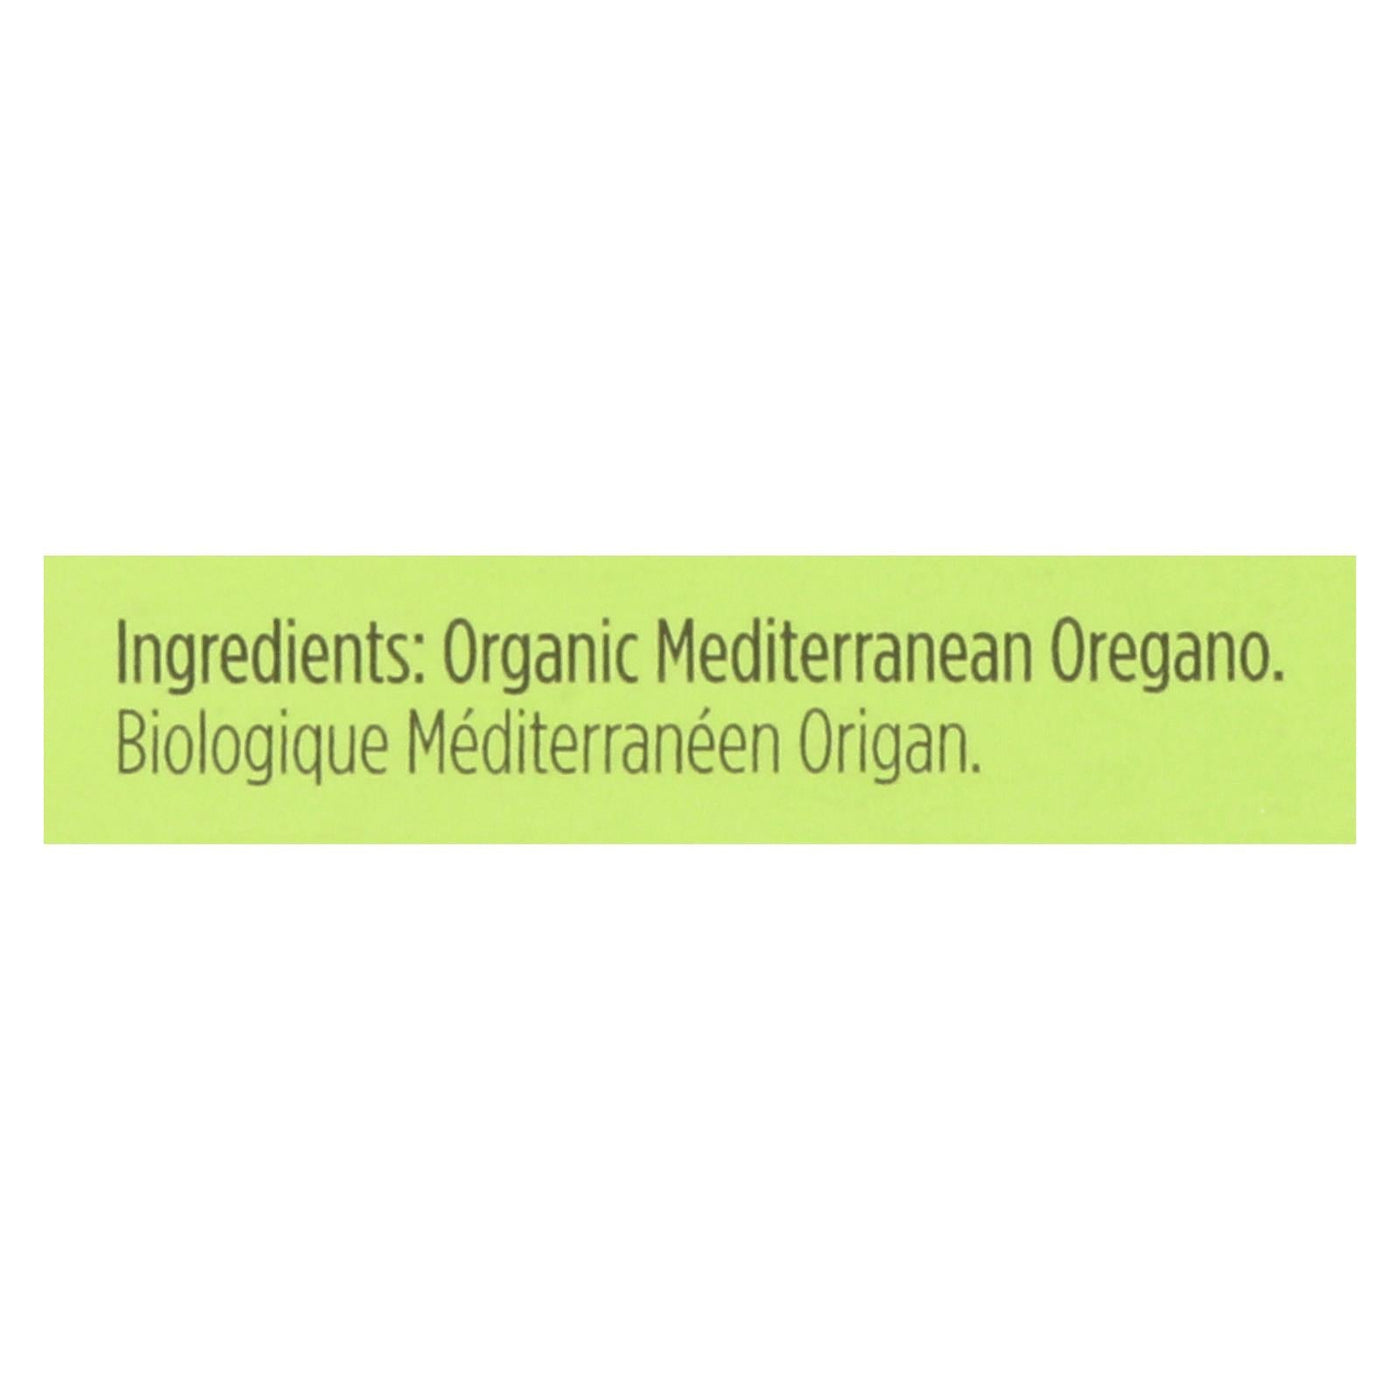 Buy Spicely Organics - Organic Oregano - Case Of 6 - 0.15 Oz.  at OnlyNaturals.us